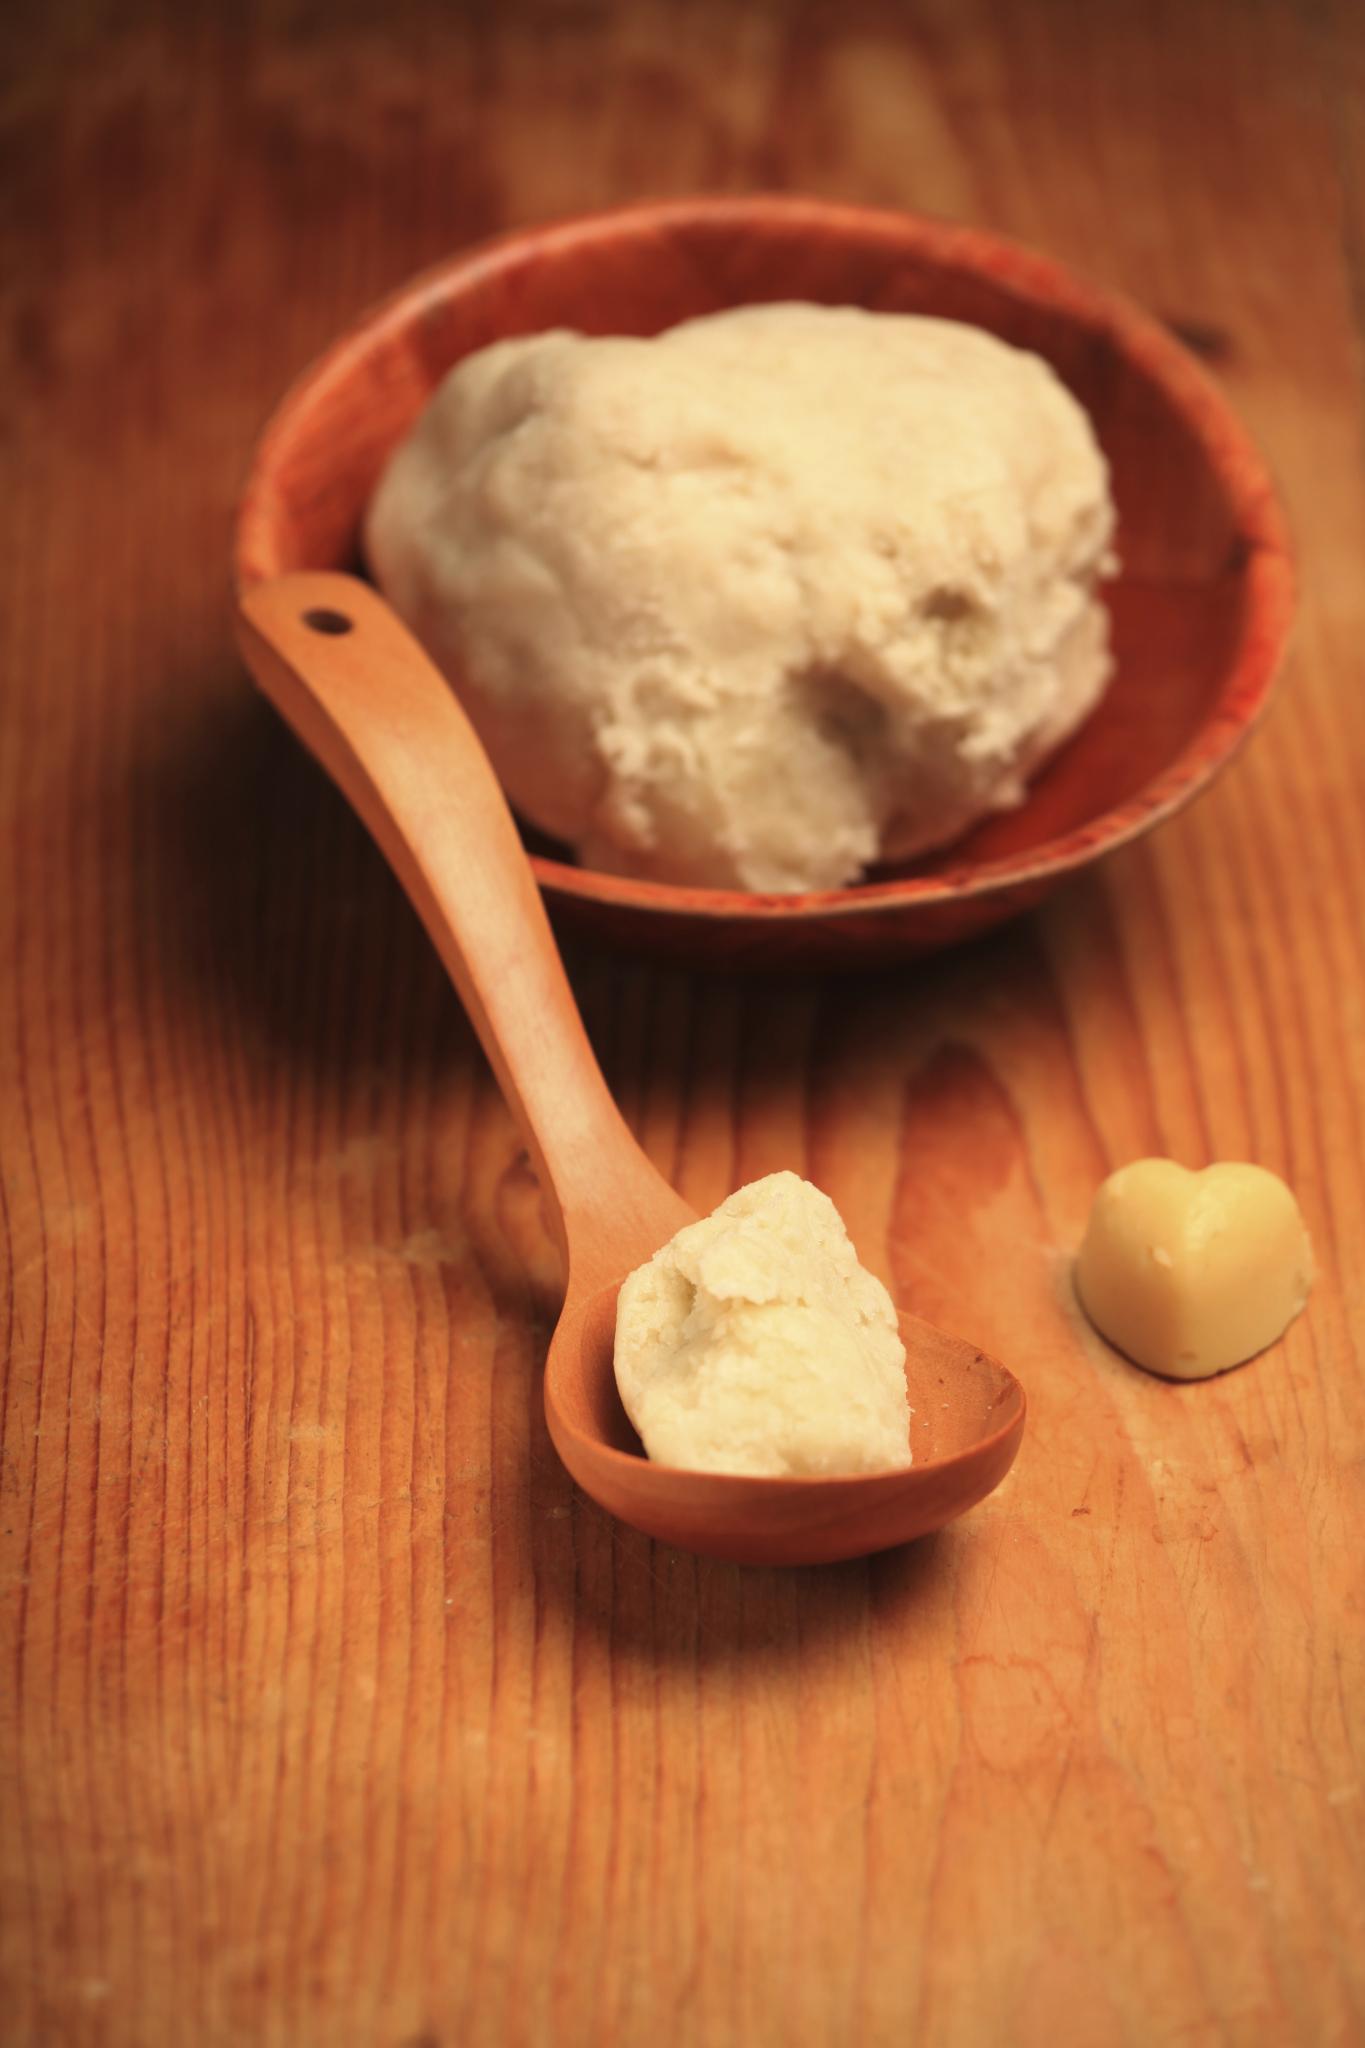 5 Facts About Shea Butter You Didn't Know